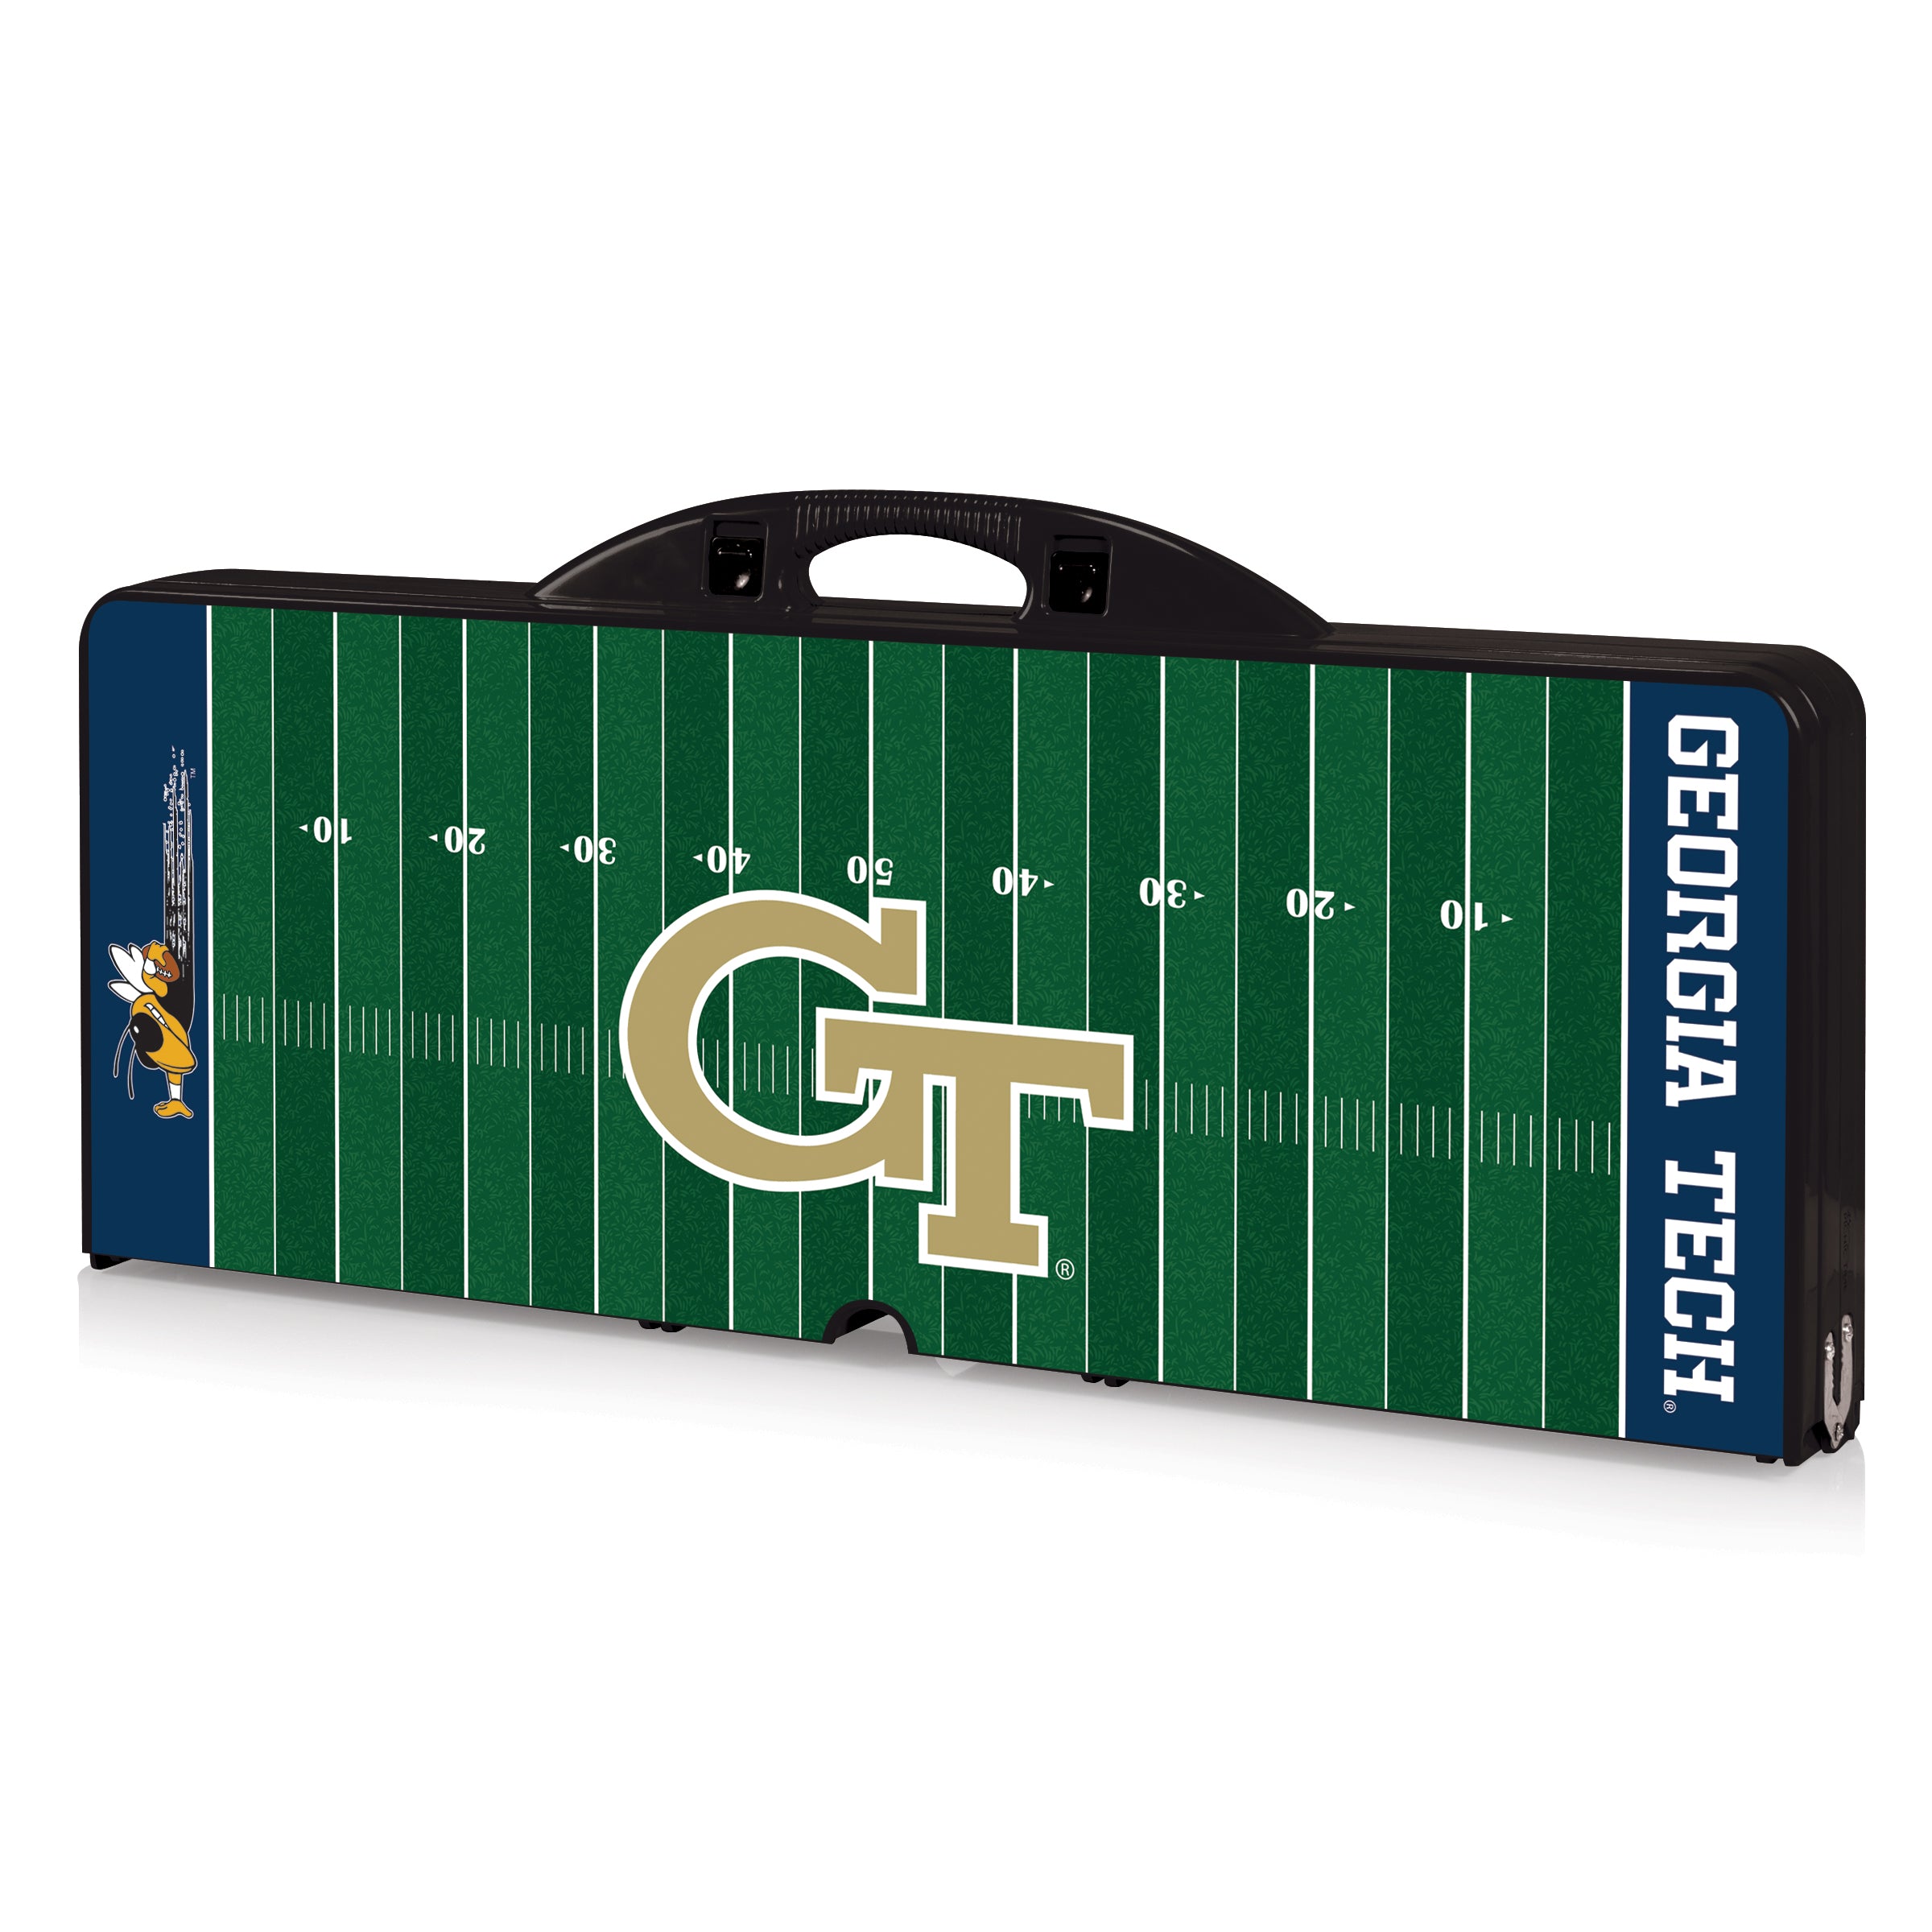 Georgia Tech Yellow Jackets Football Field - Picnic Table Portable Folding Table with Seats